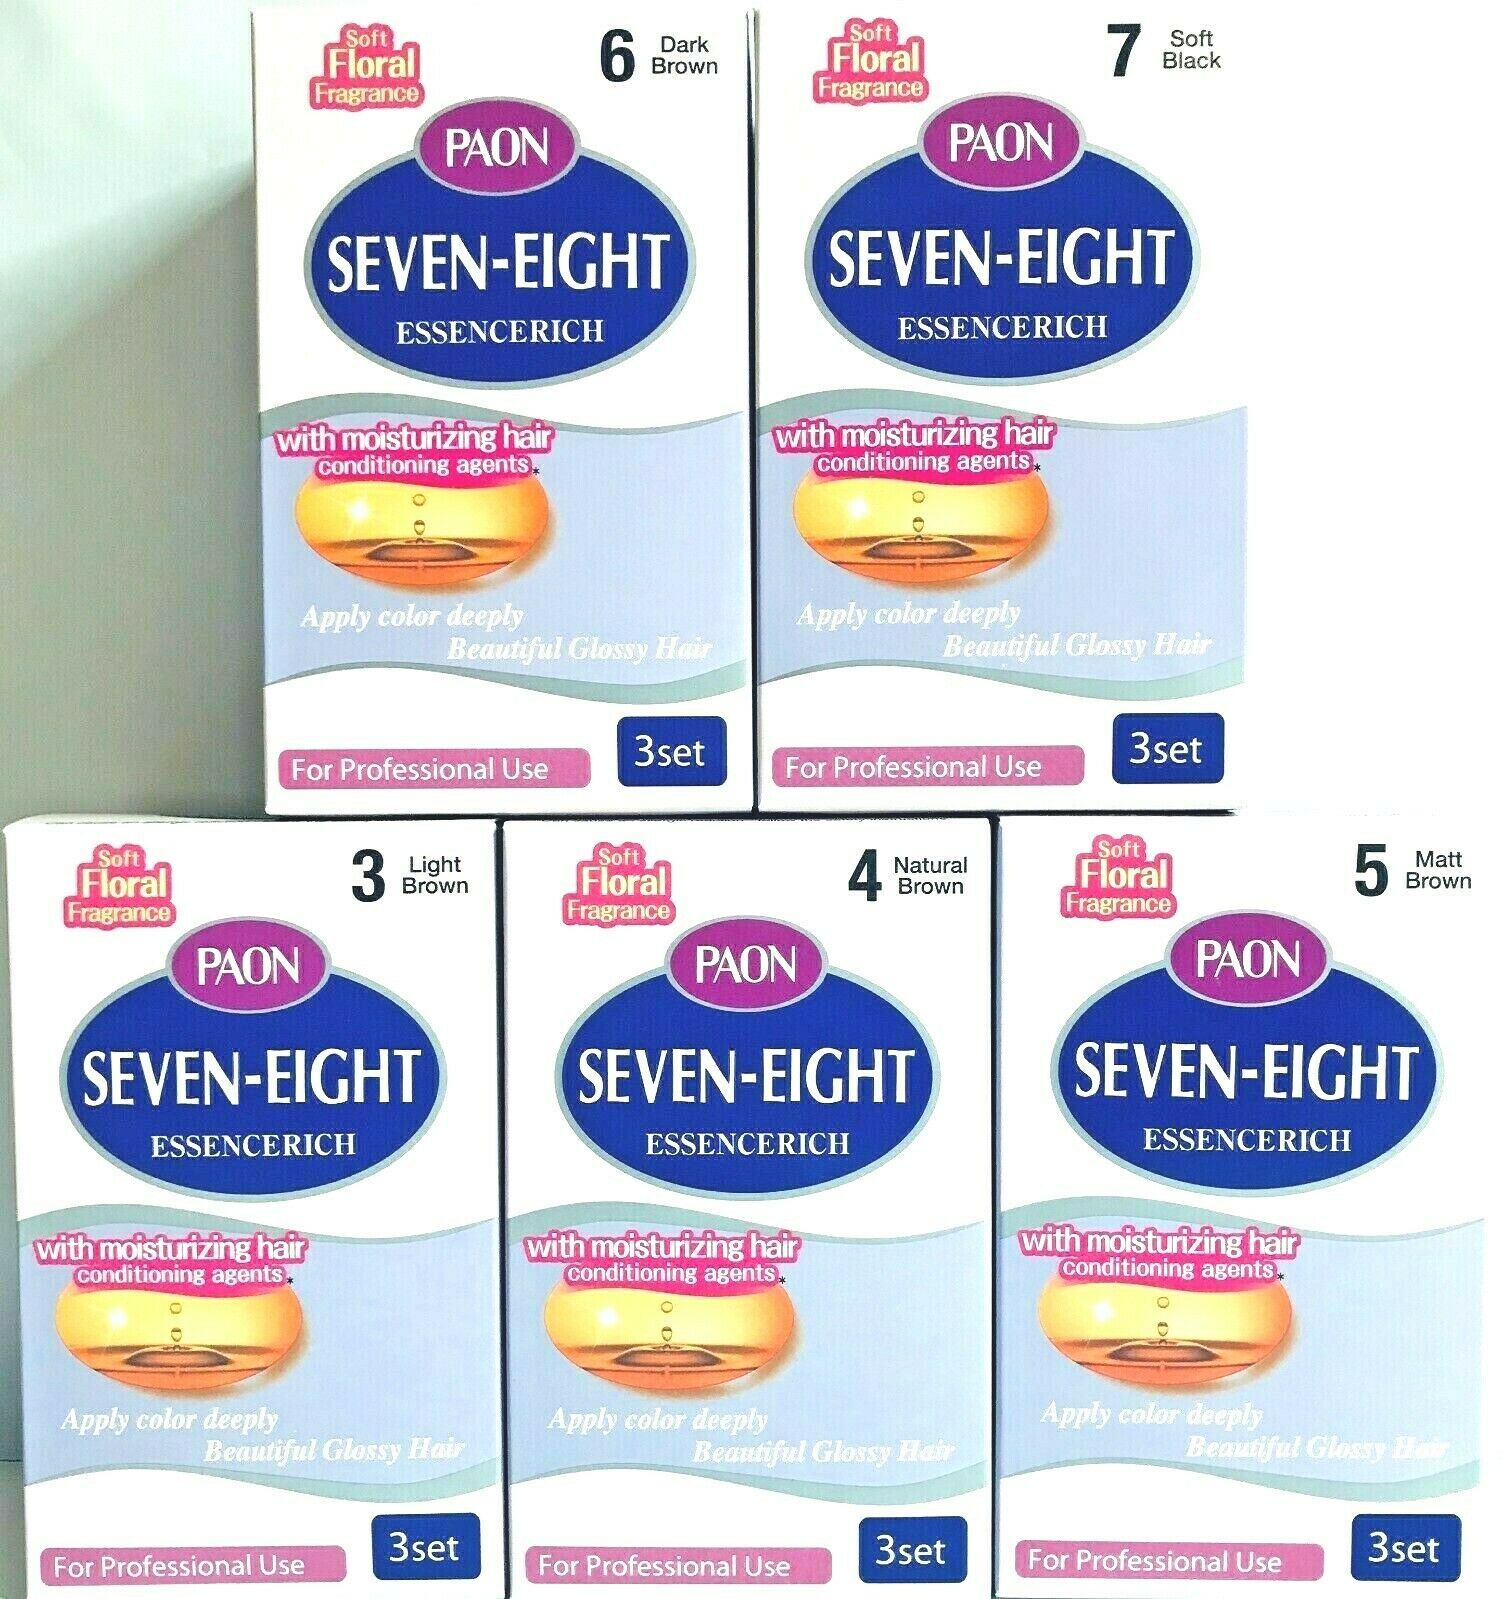 3x 3 Set PAON Ammonia Free Seven-Eight EssenceRich  # 3/4/5/6/7 New Packaging